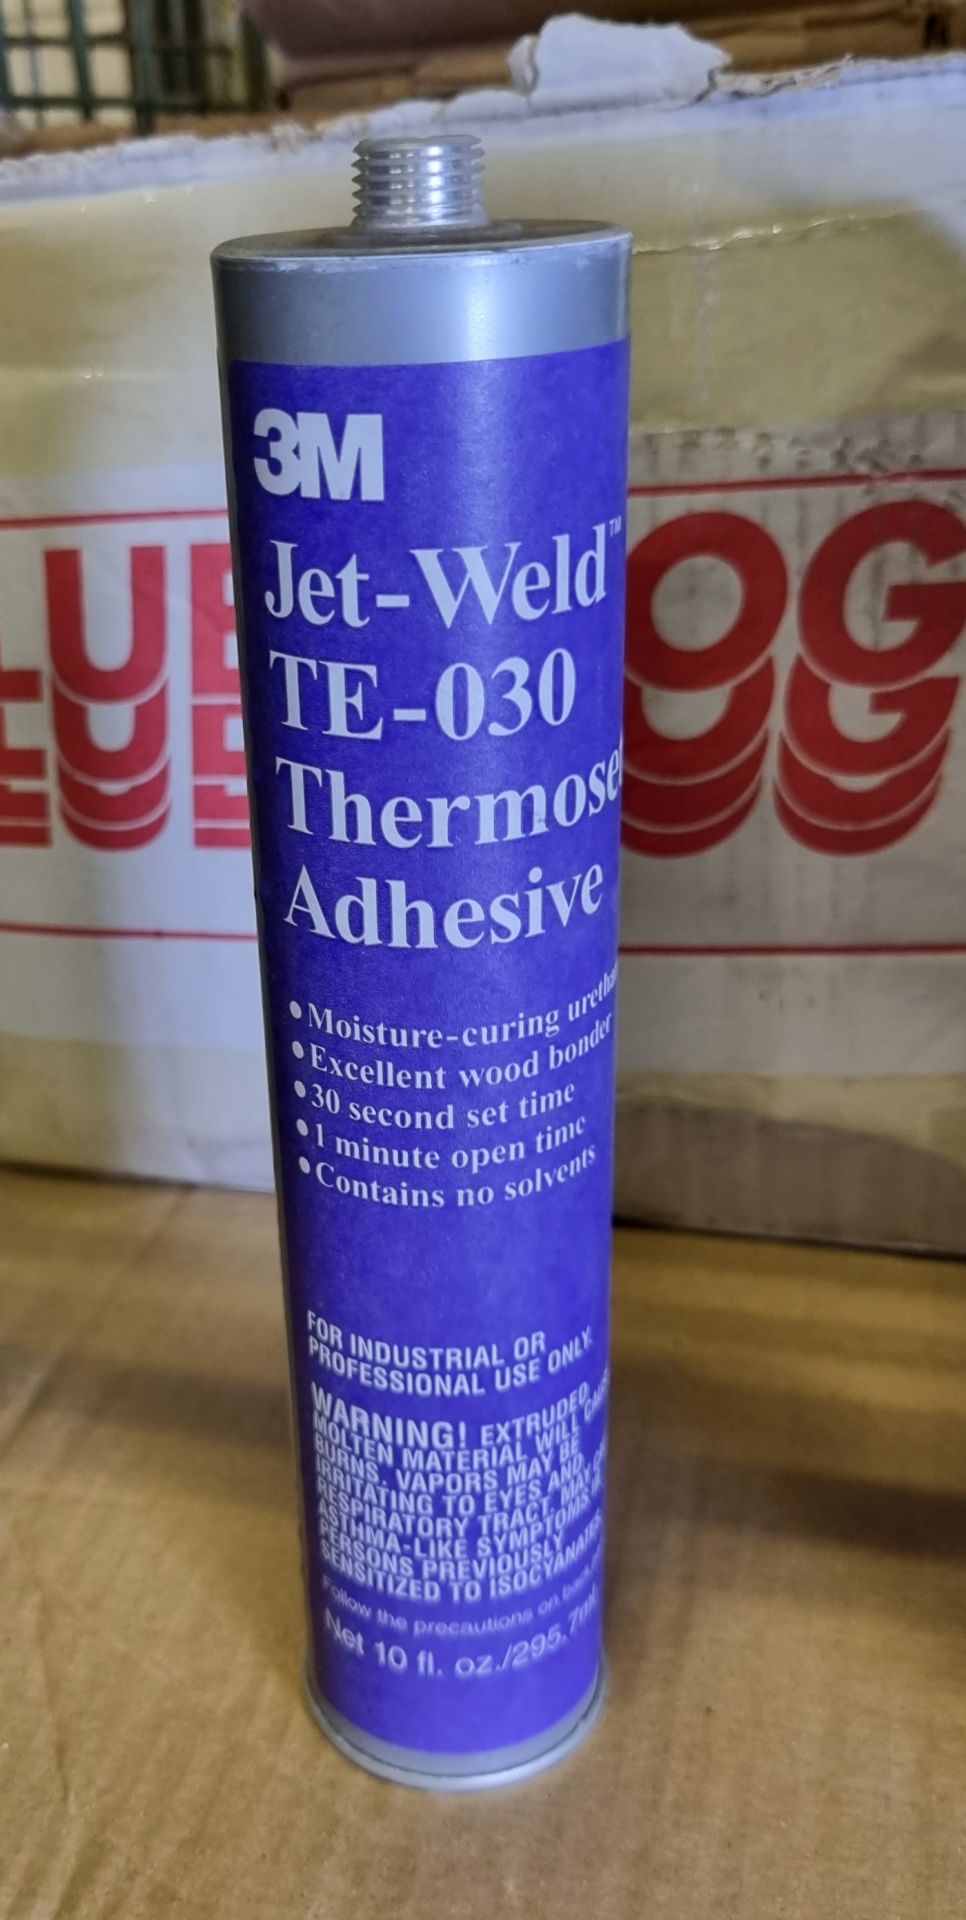 Adhesive and cleaner spares - Lubrilog - Technomelt - 3M - expiry dates unknown - Image 4 of 10